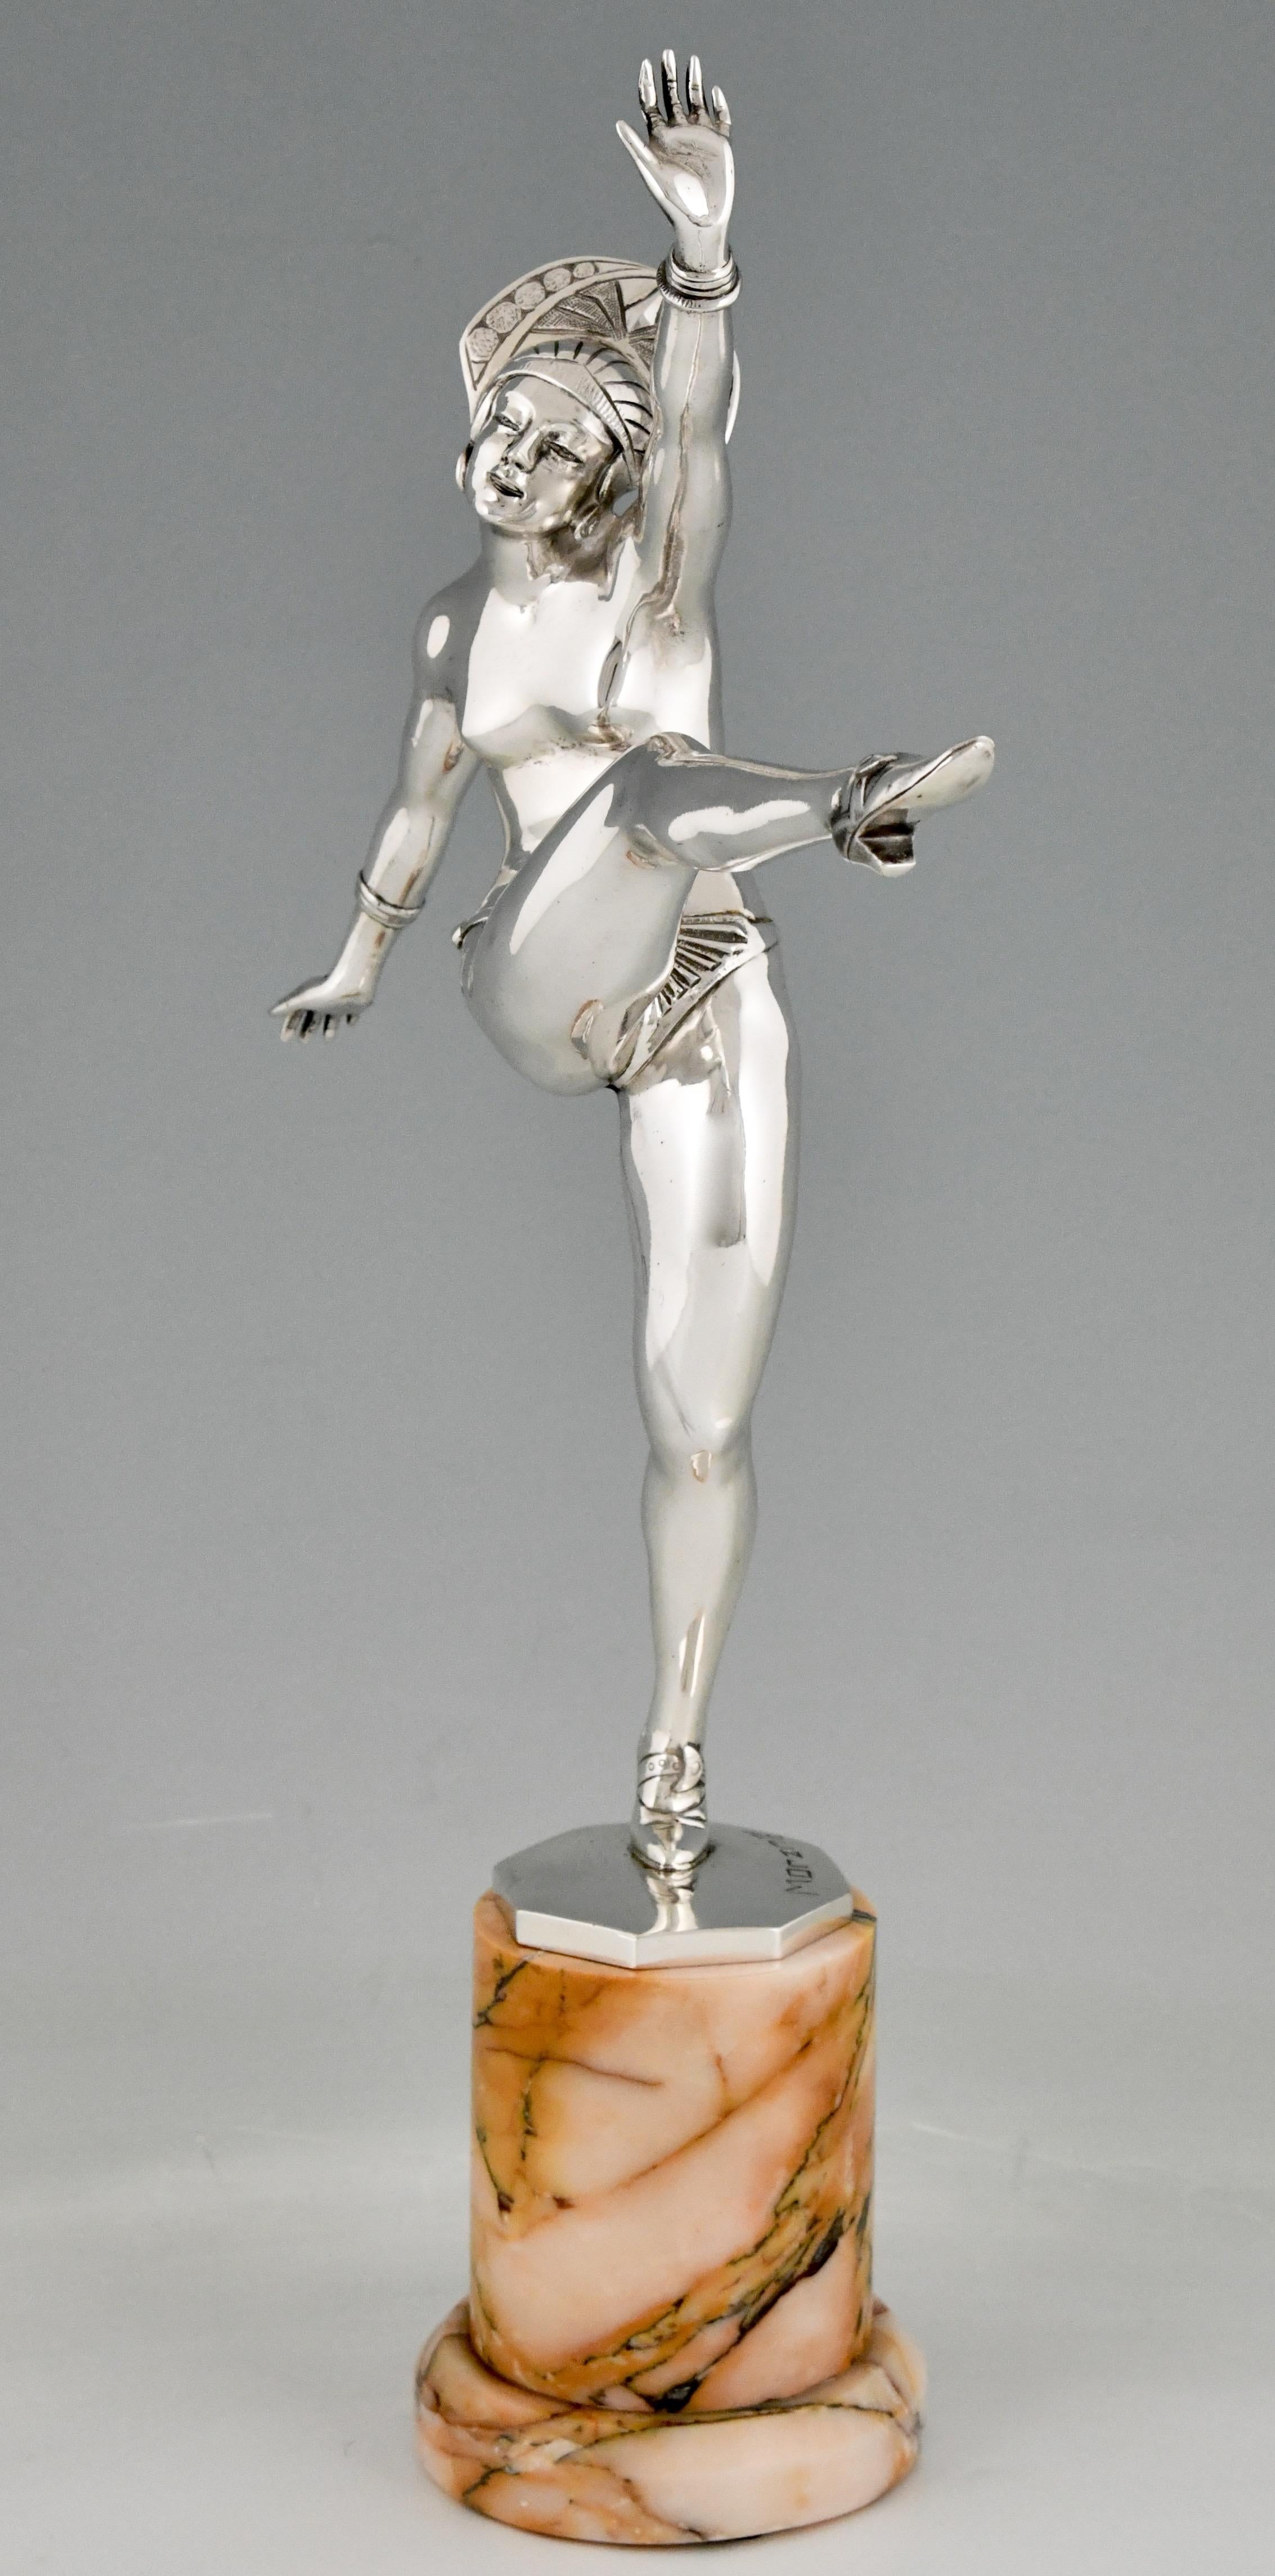 French Art Deco Silvered Bronze Sculpture of a Nude Dancer by Morante France 1925